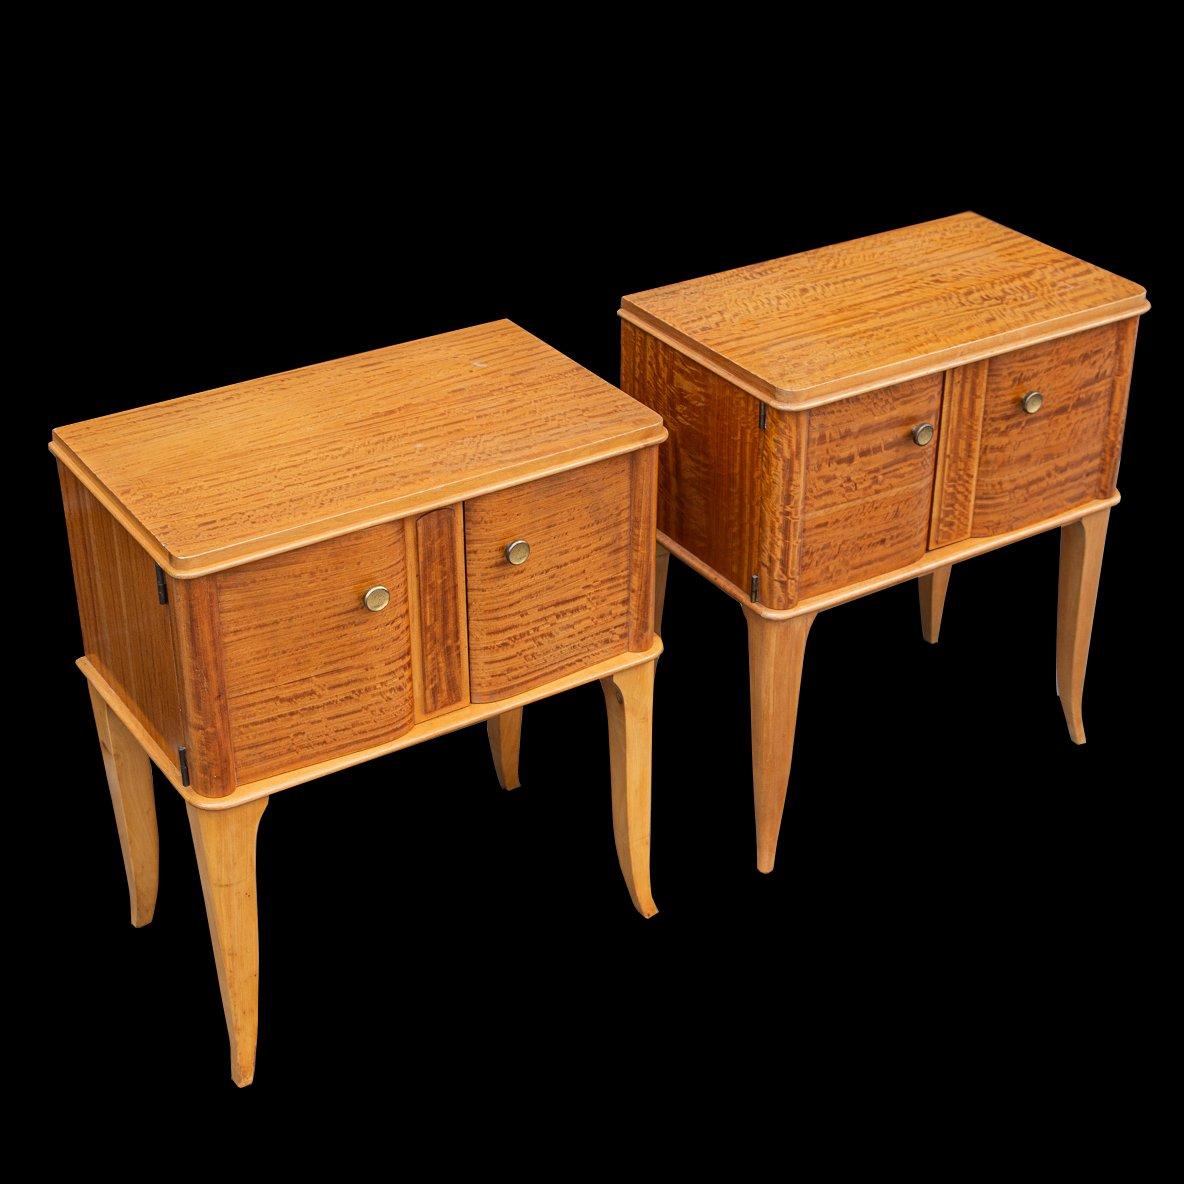 Elegant Deco beautifully made matching Satin birch (lemon wood) cabinets with stunning patina. Original quality brass handles and opening via two hinged doors with a typical Pascaud form standing on sabre legs. Excellent joinery and of solid